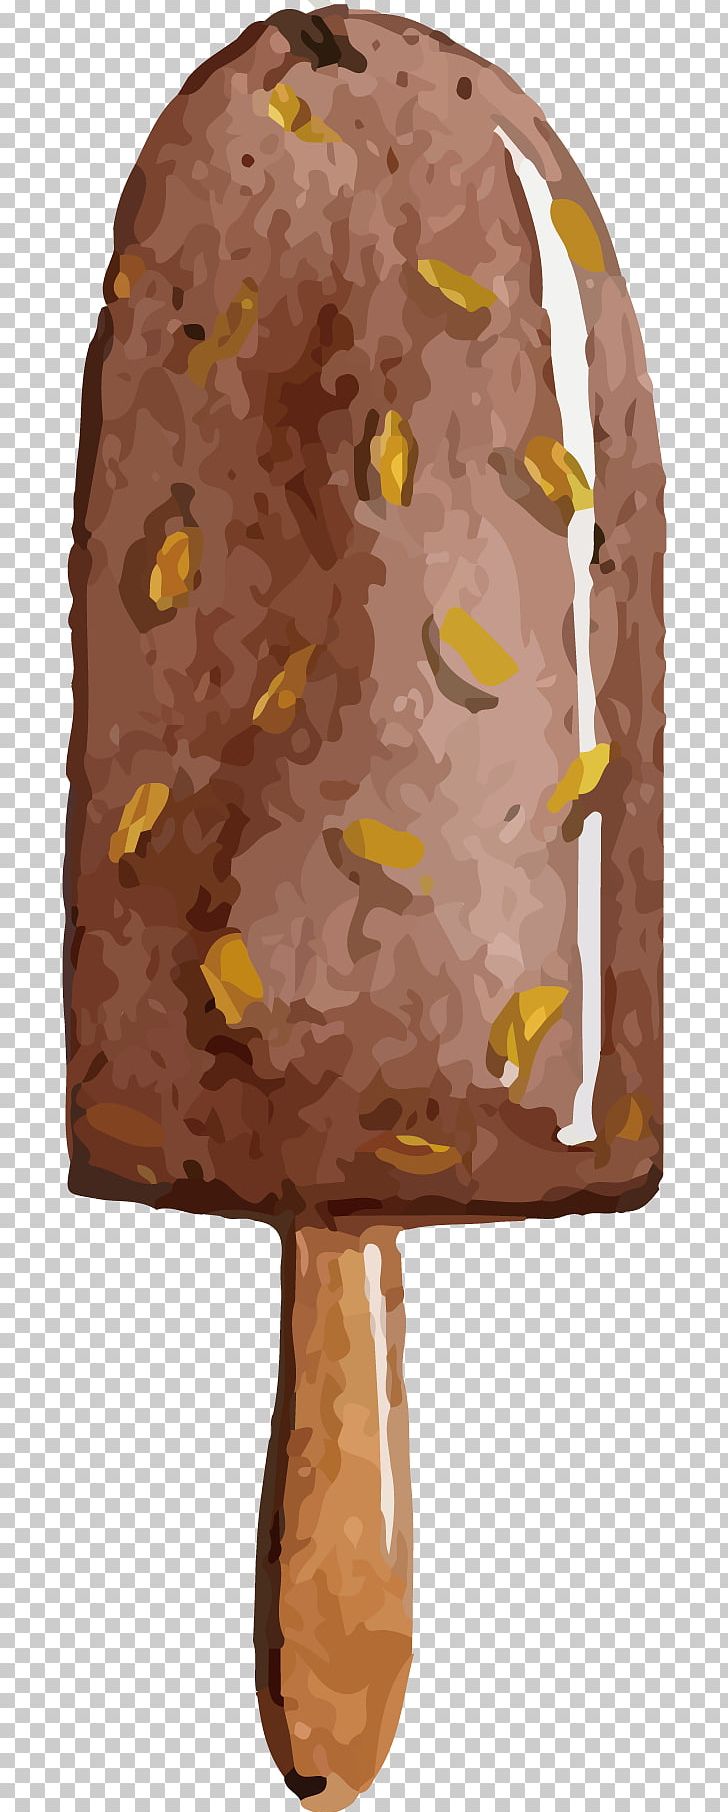 Ice Cream Cone Ice Pop Chocolate PNG, Clipart, Brown, Cafe, Cartoon, Chocolates, Chocolate Vector Free PNG Download